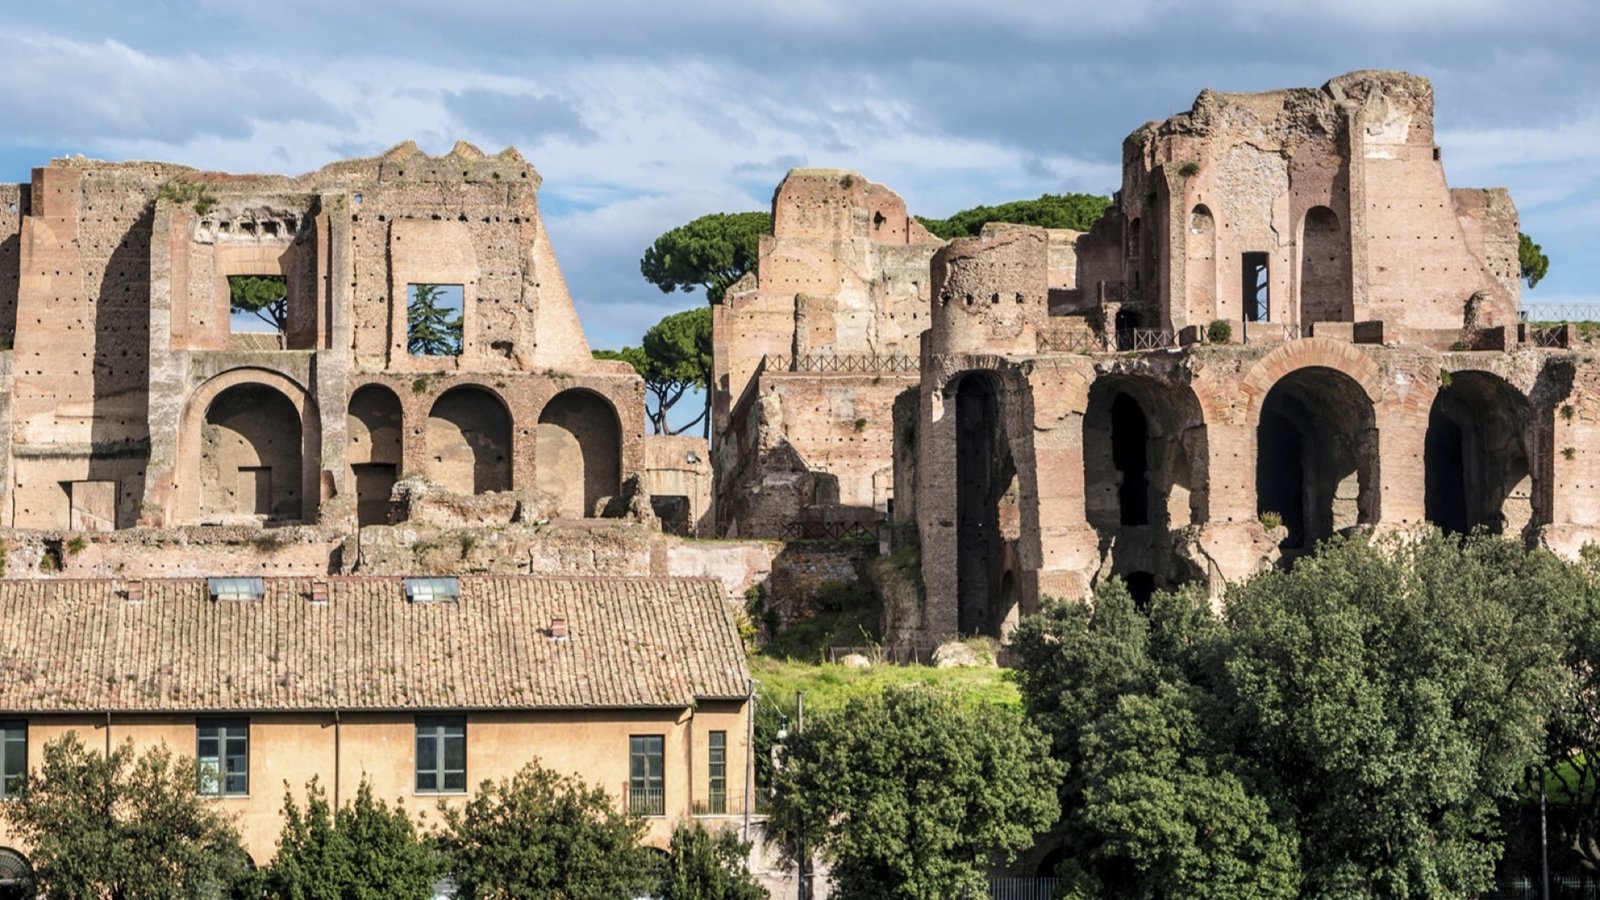 Imperial Palaces of the Palatine Hill